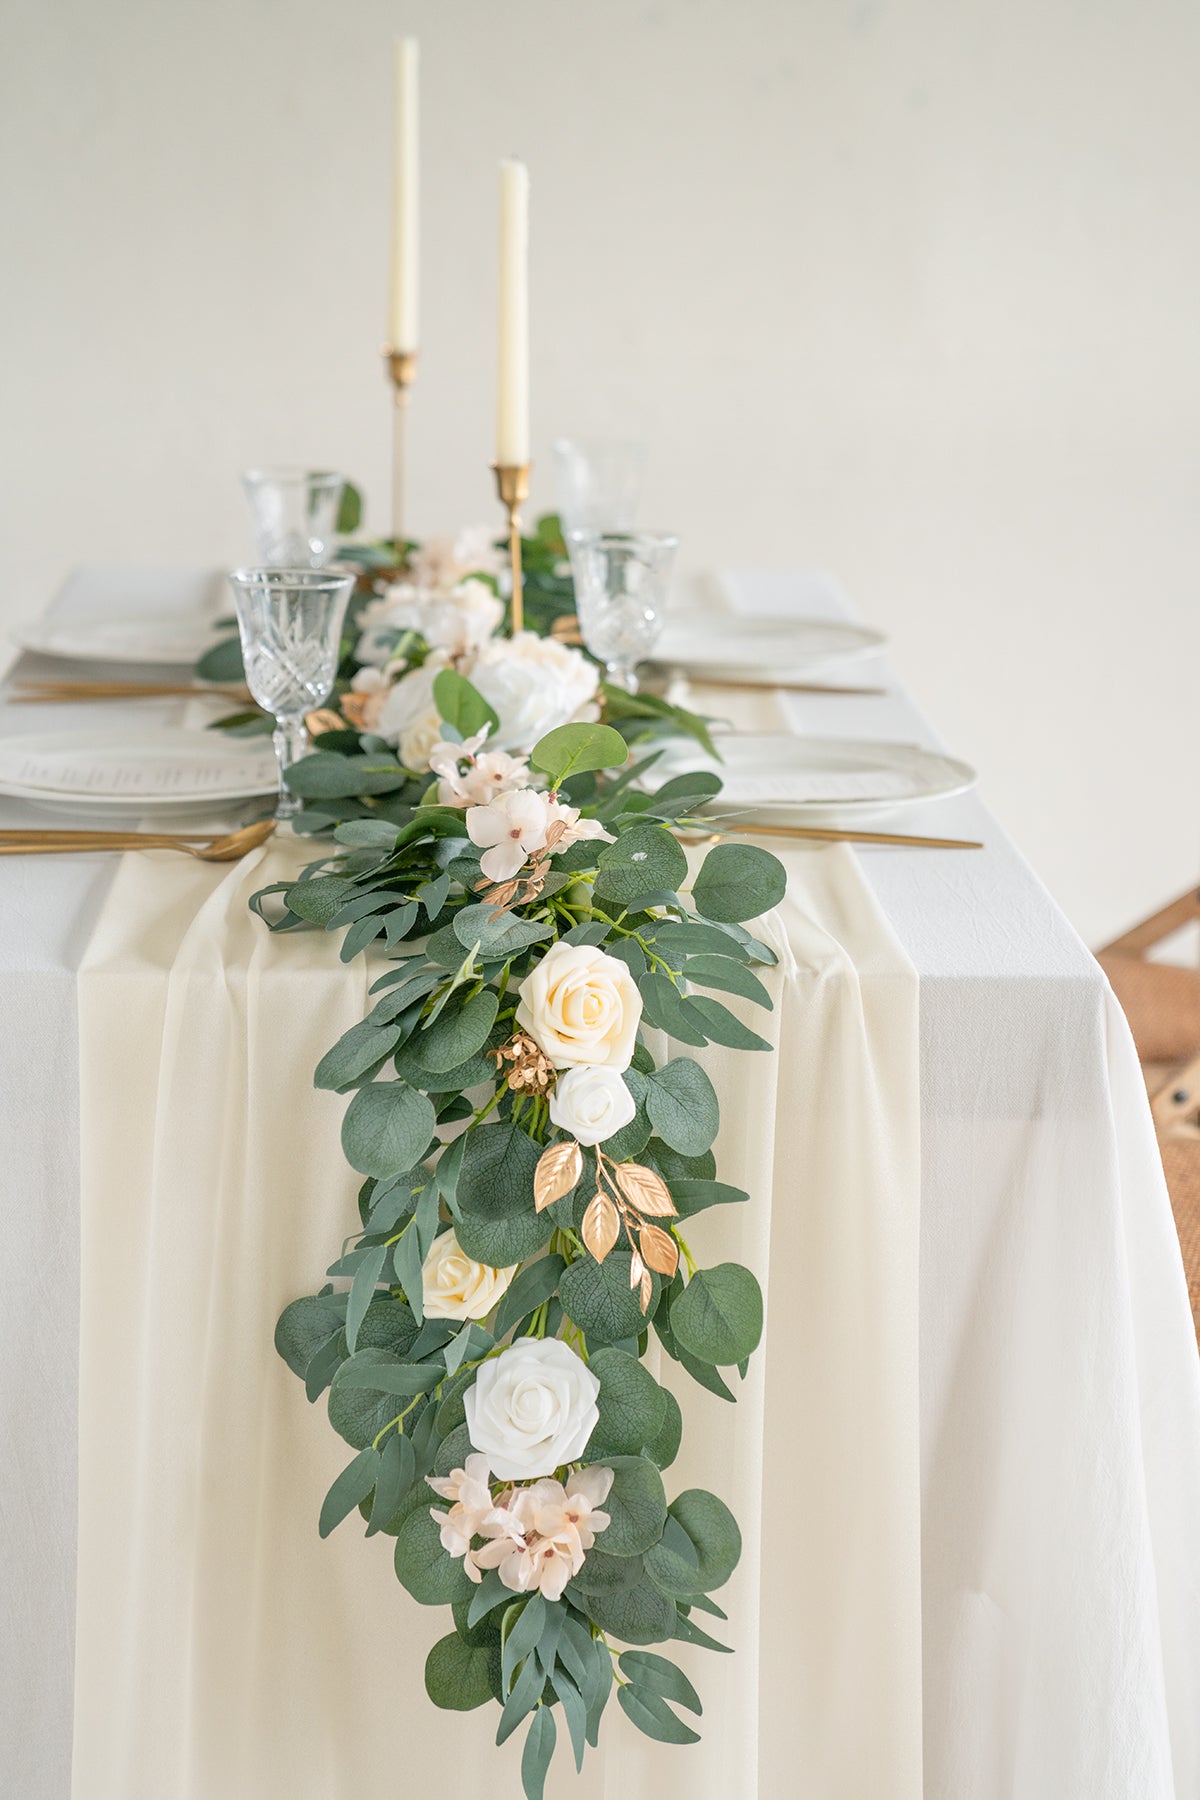 Table Linens in White & Beige